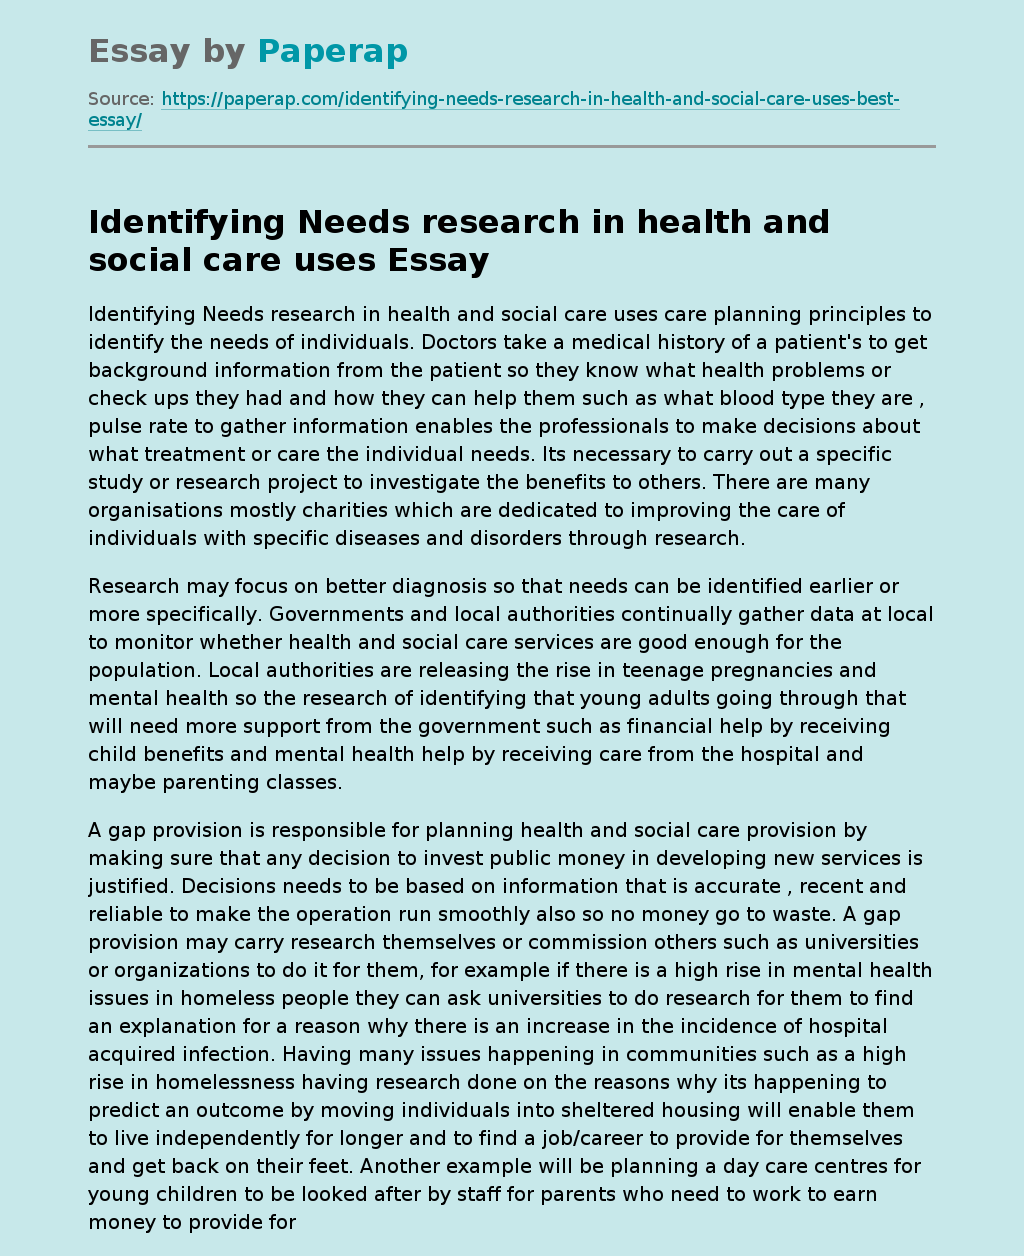 Identifying Needs research in health and social care uses